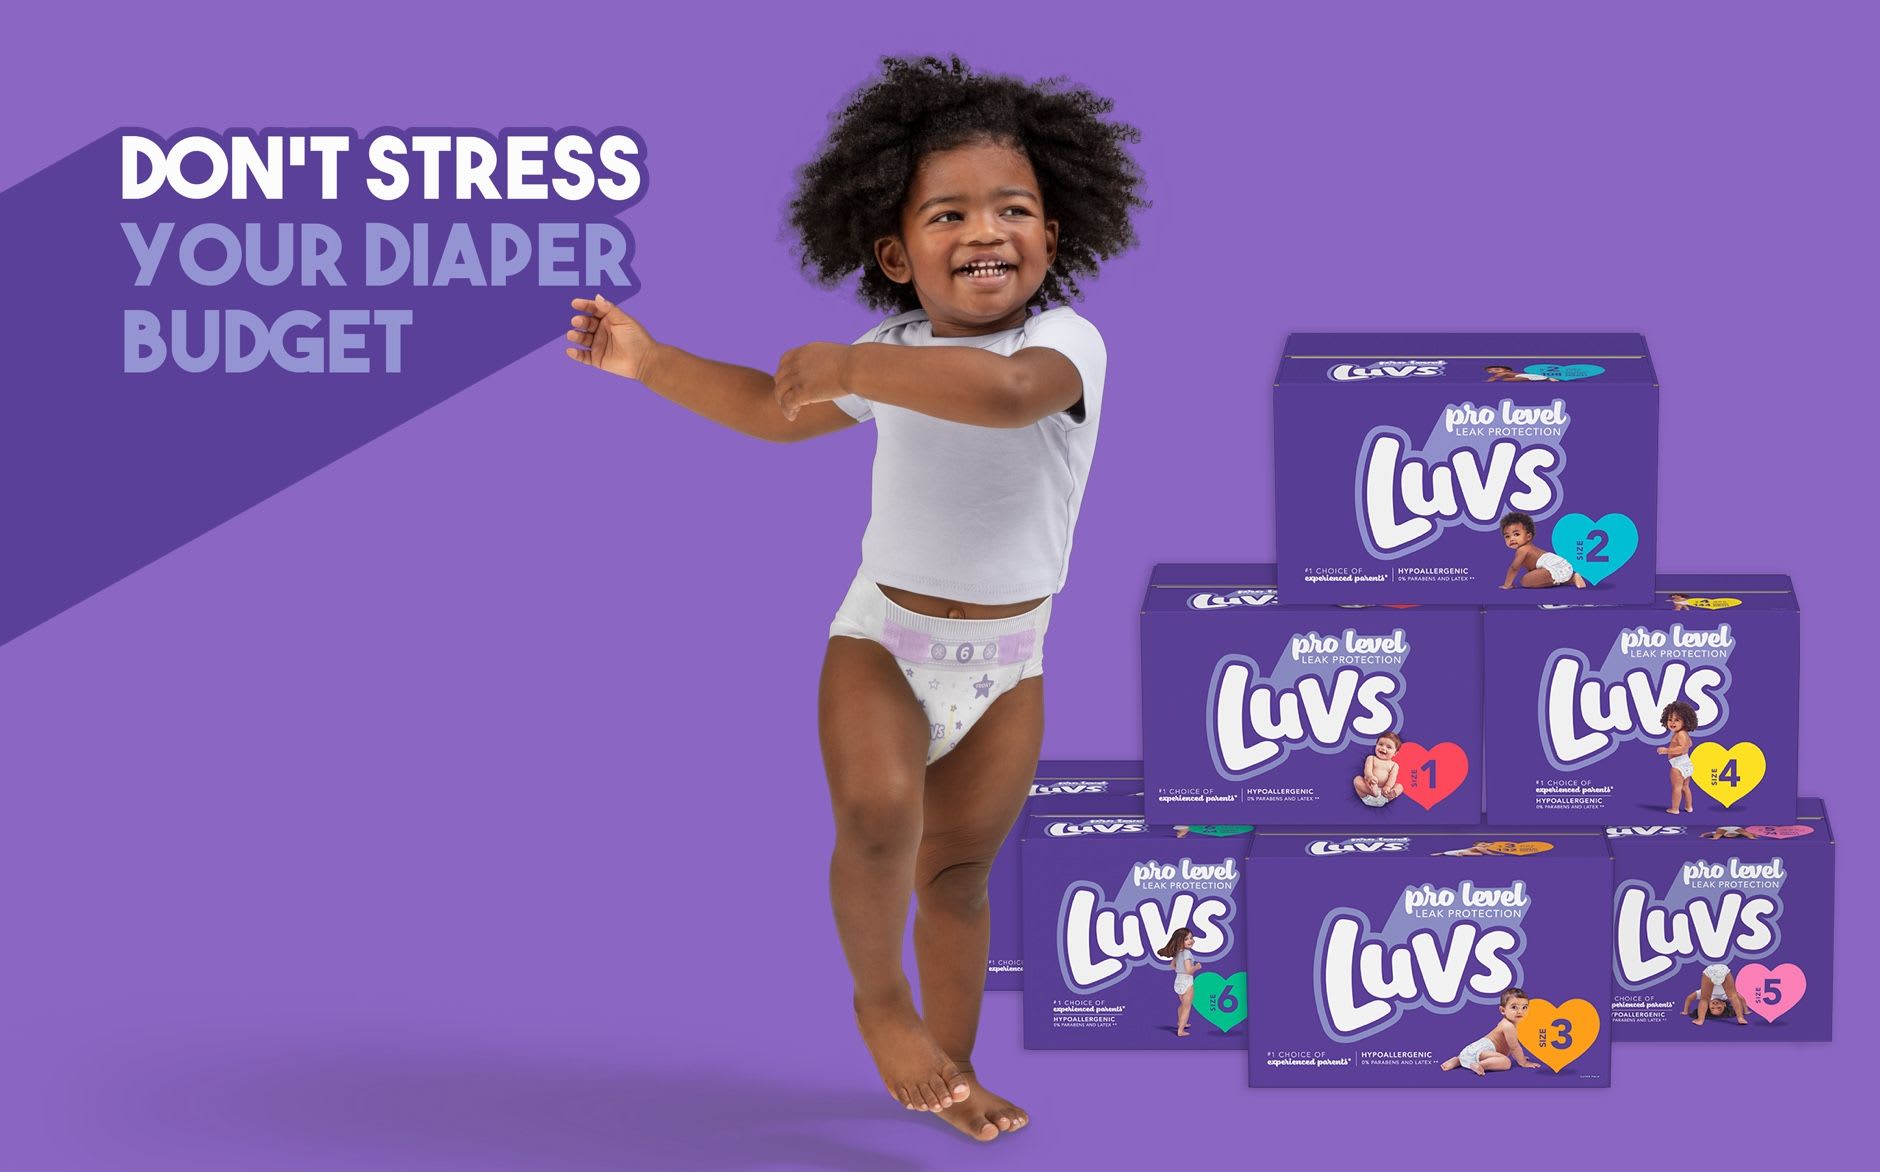 DON'T STRESS YOUR DIAPER BUDGET